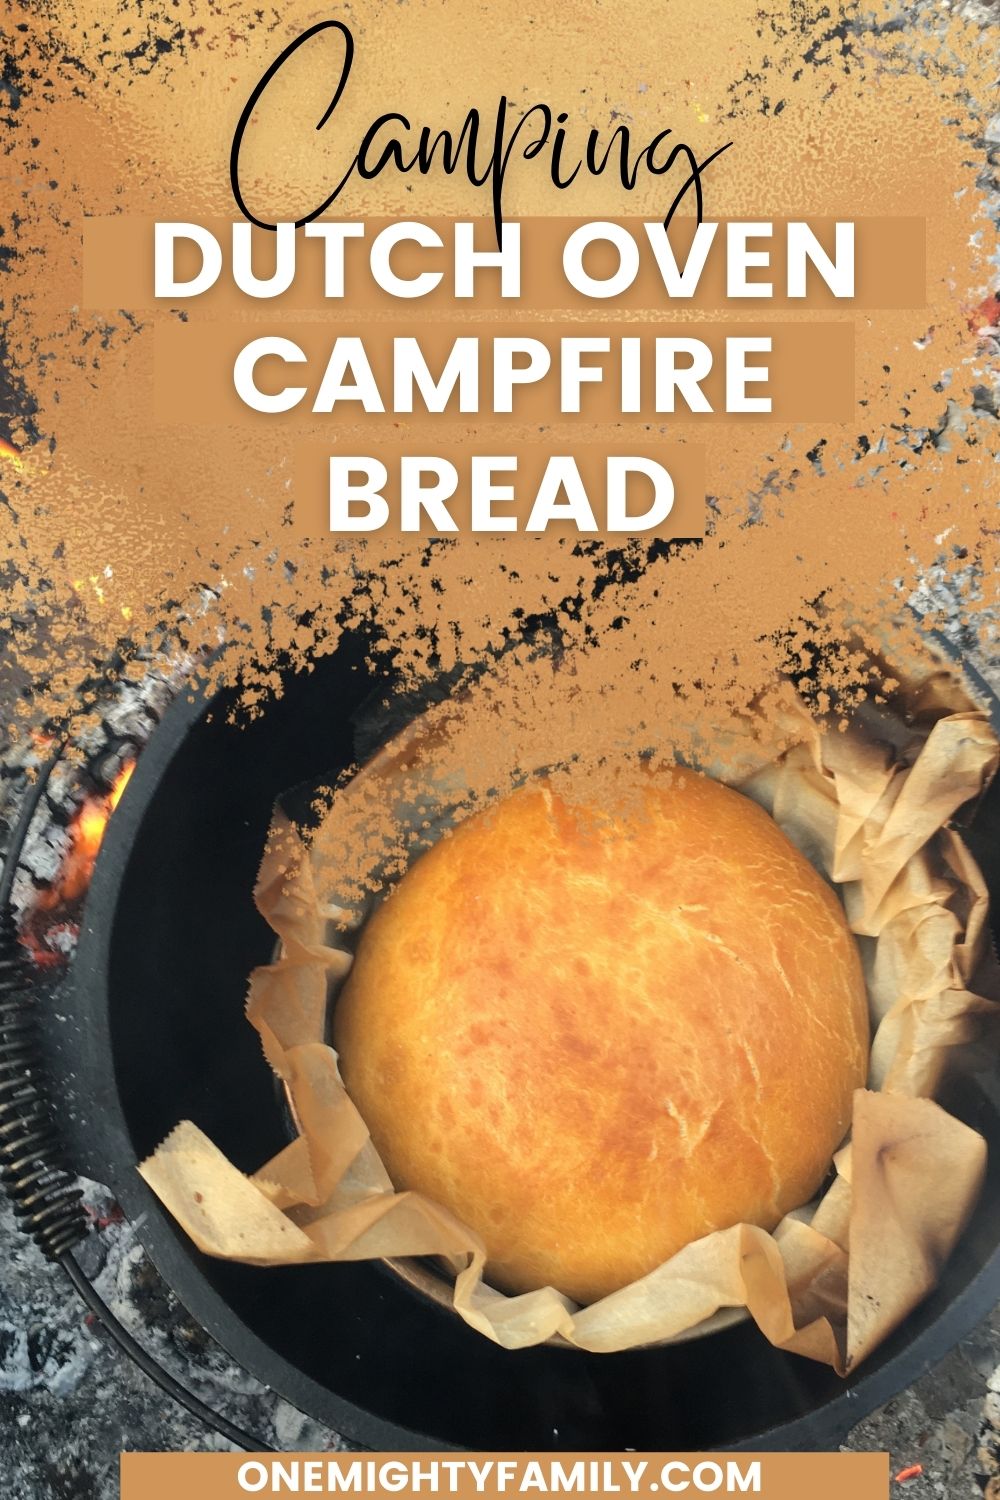 how to make bread in a dutch oven camping